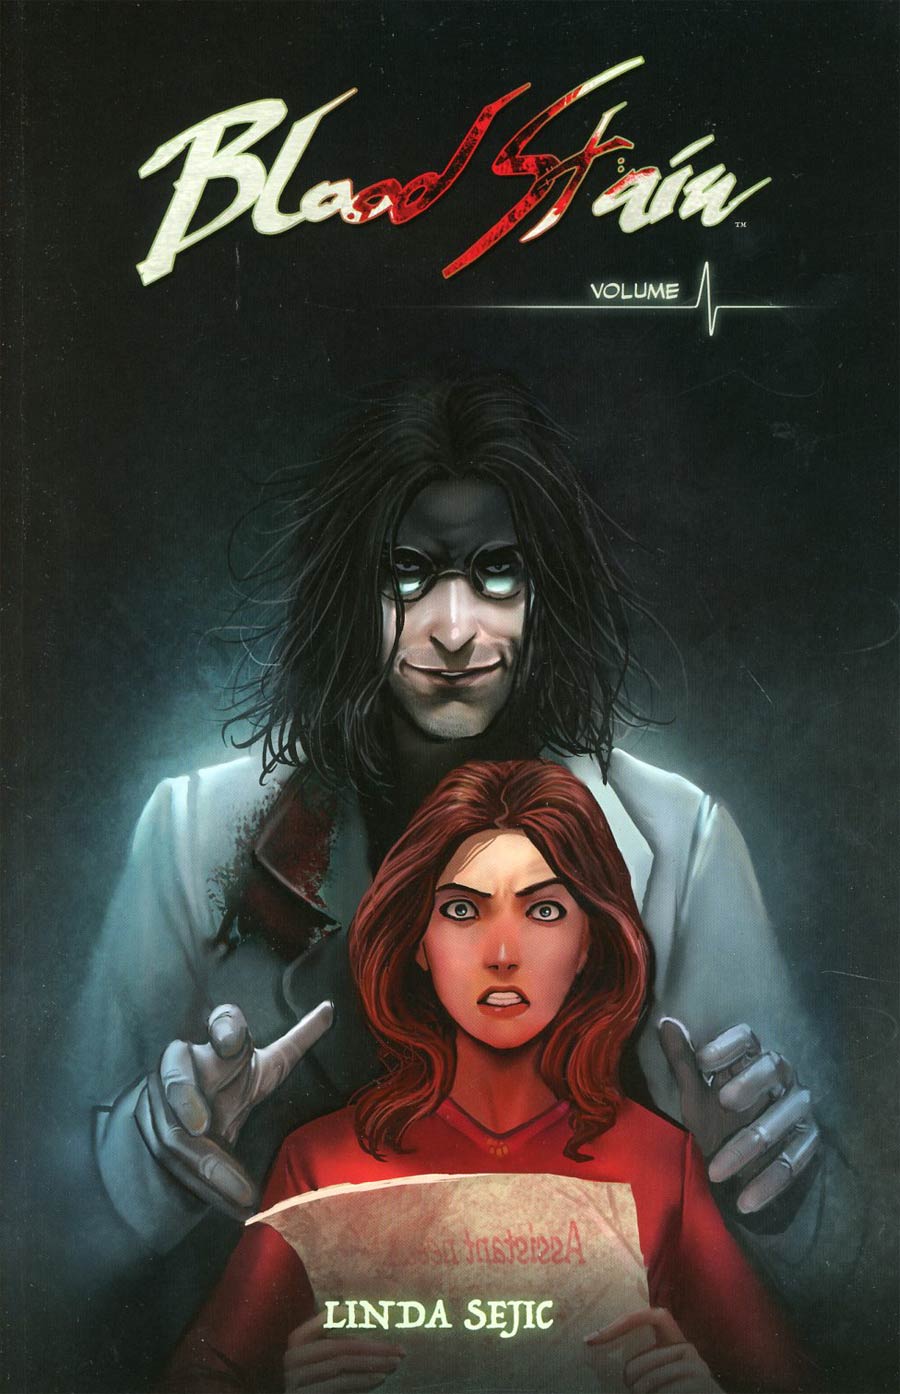 Blood Stain Vol 1 TP